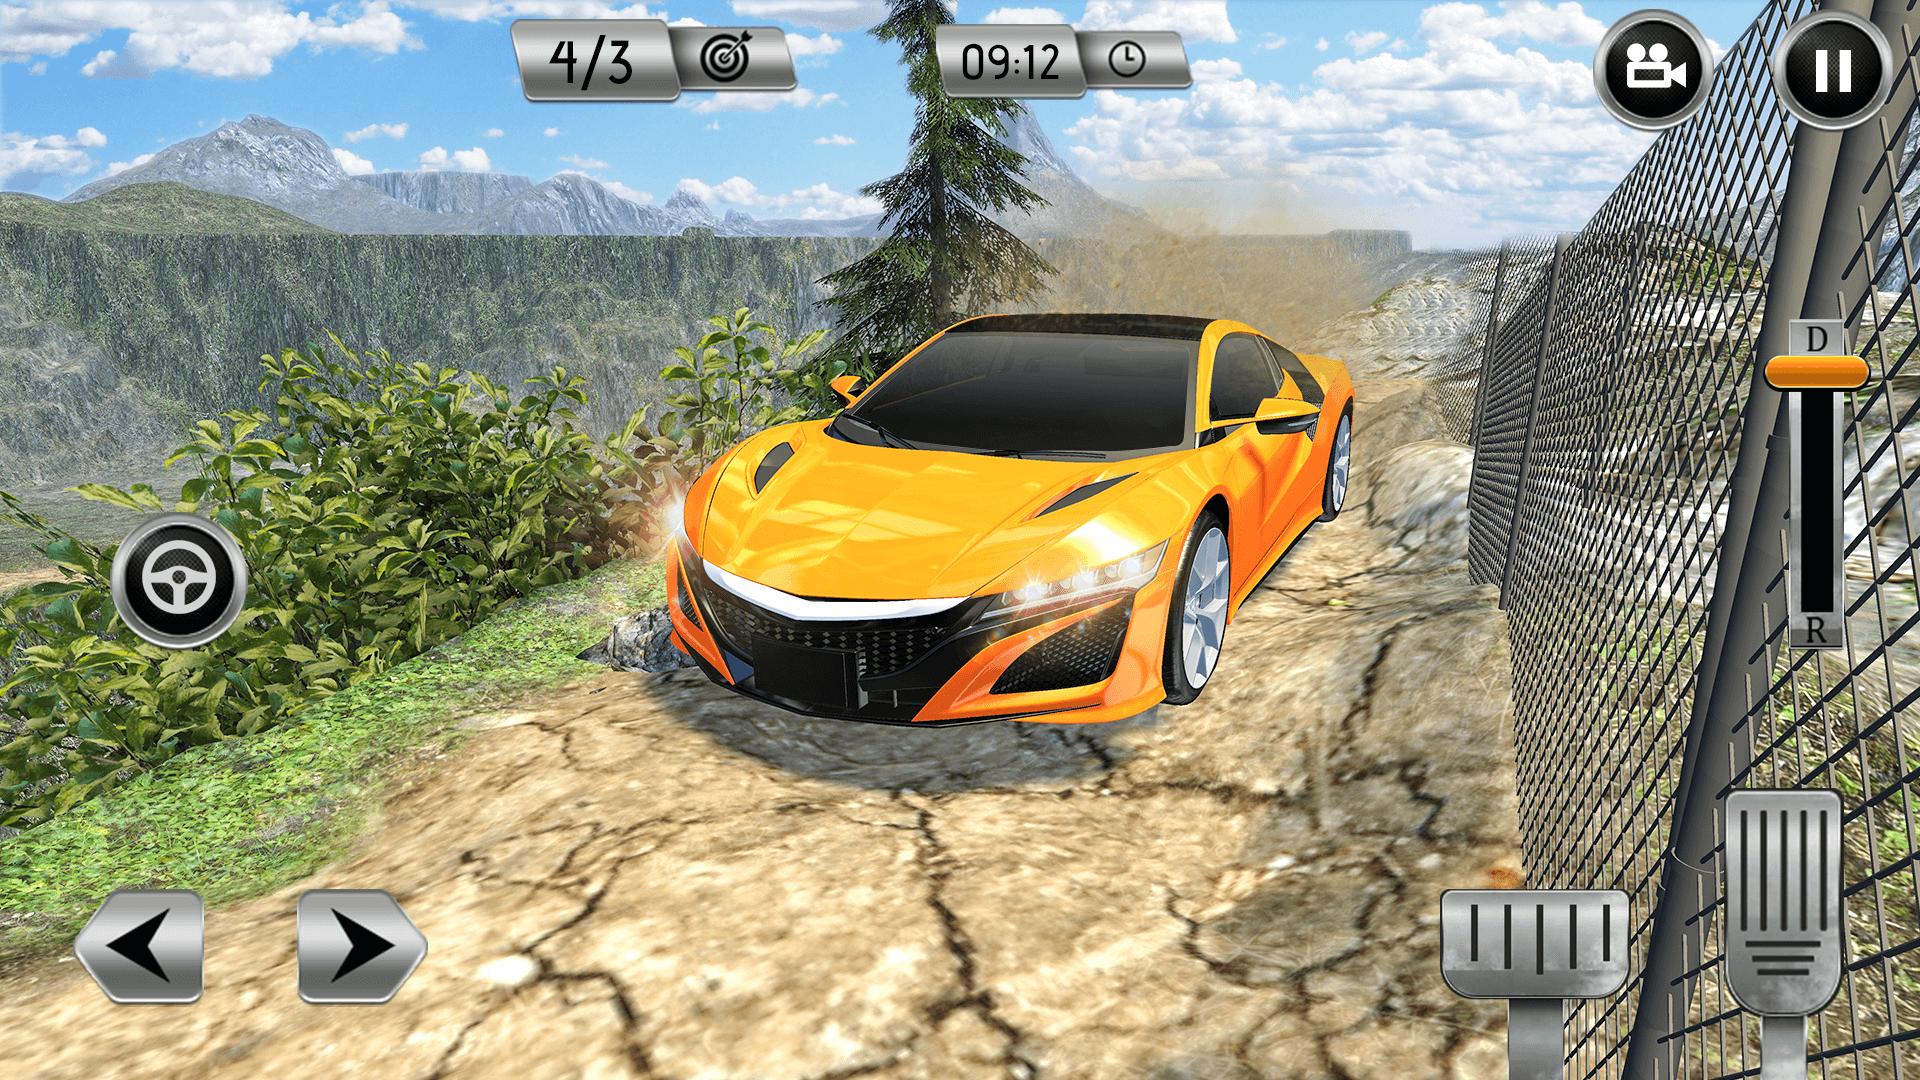 Offroad car driving все открыто. Offroad car Driving. Test Drive off-Road 3. Offroad car Driving game. Car SIM Android games.